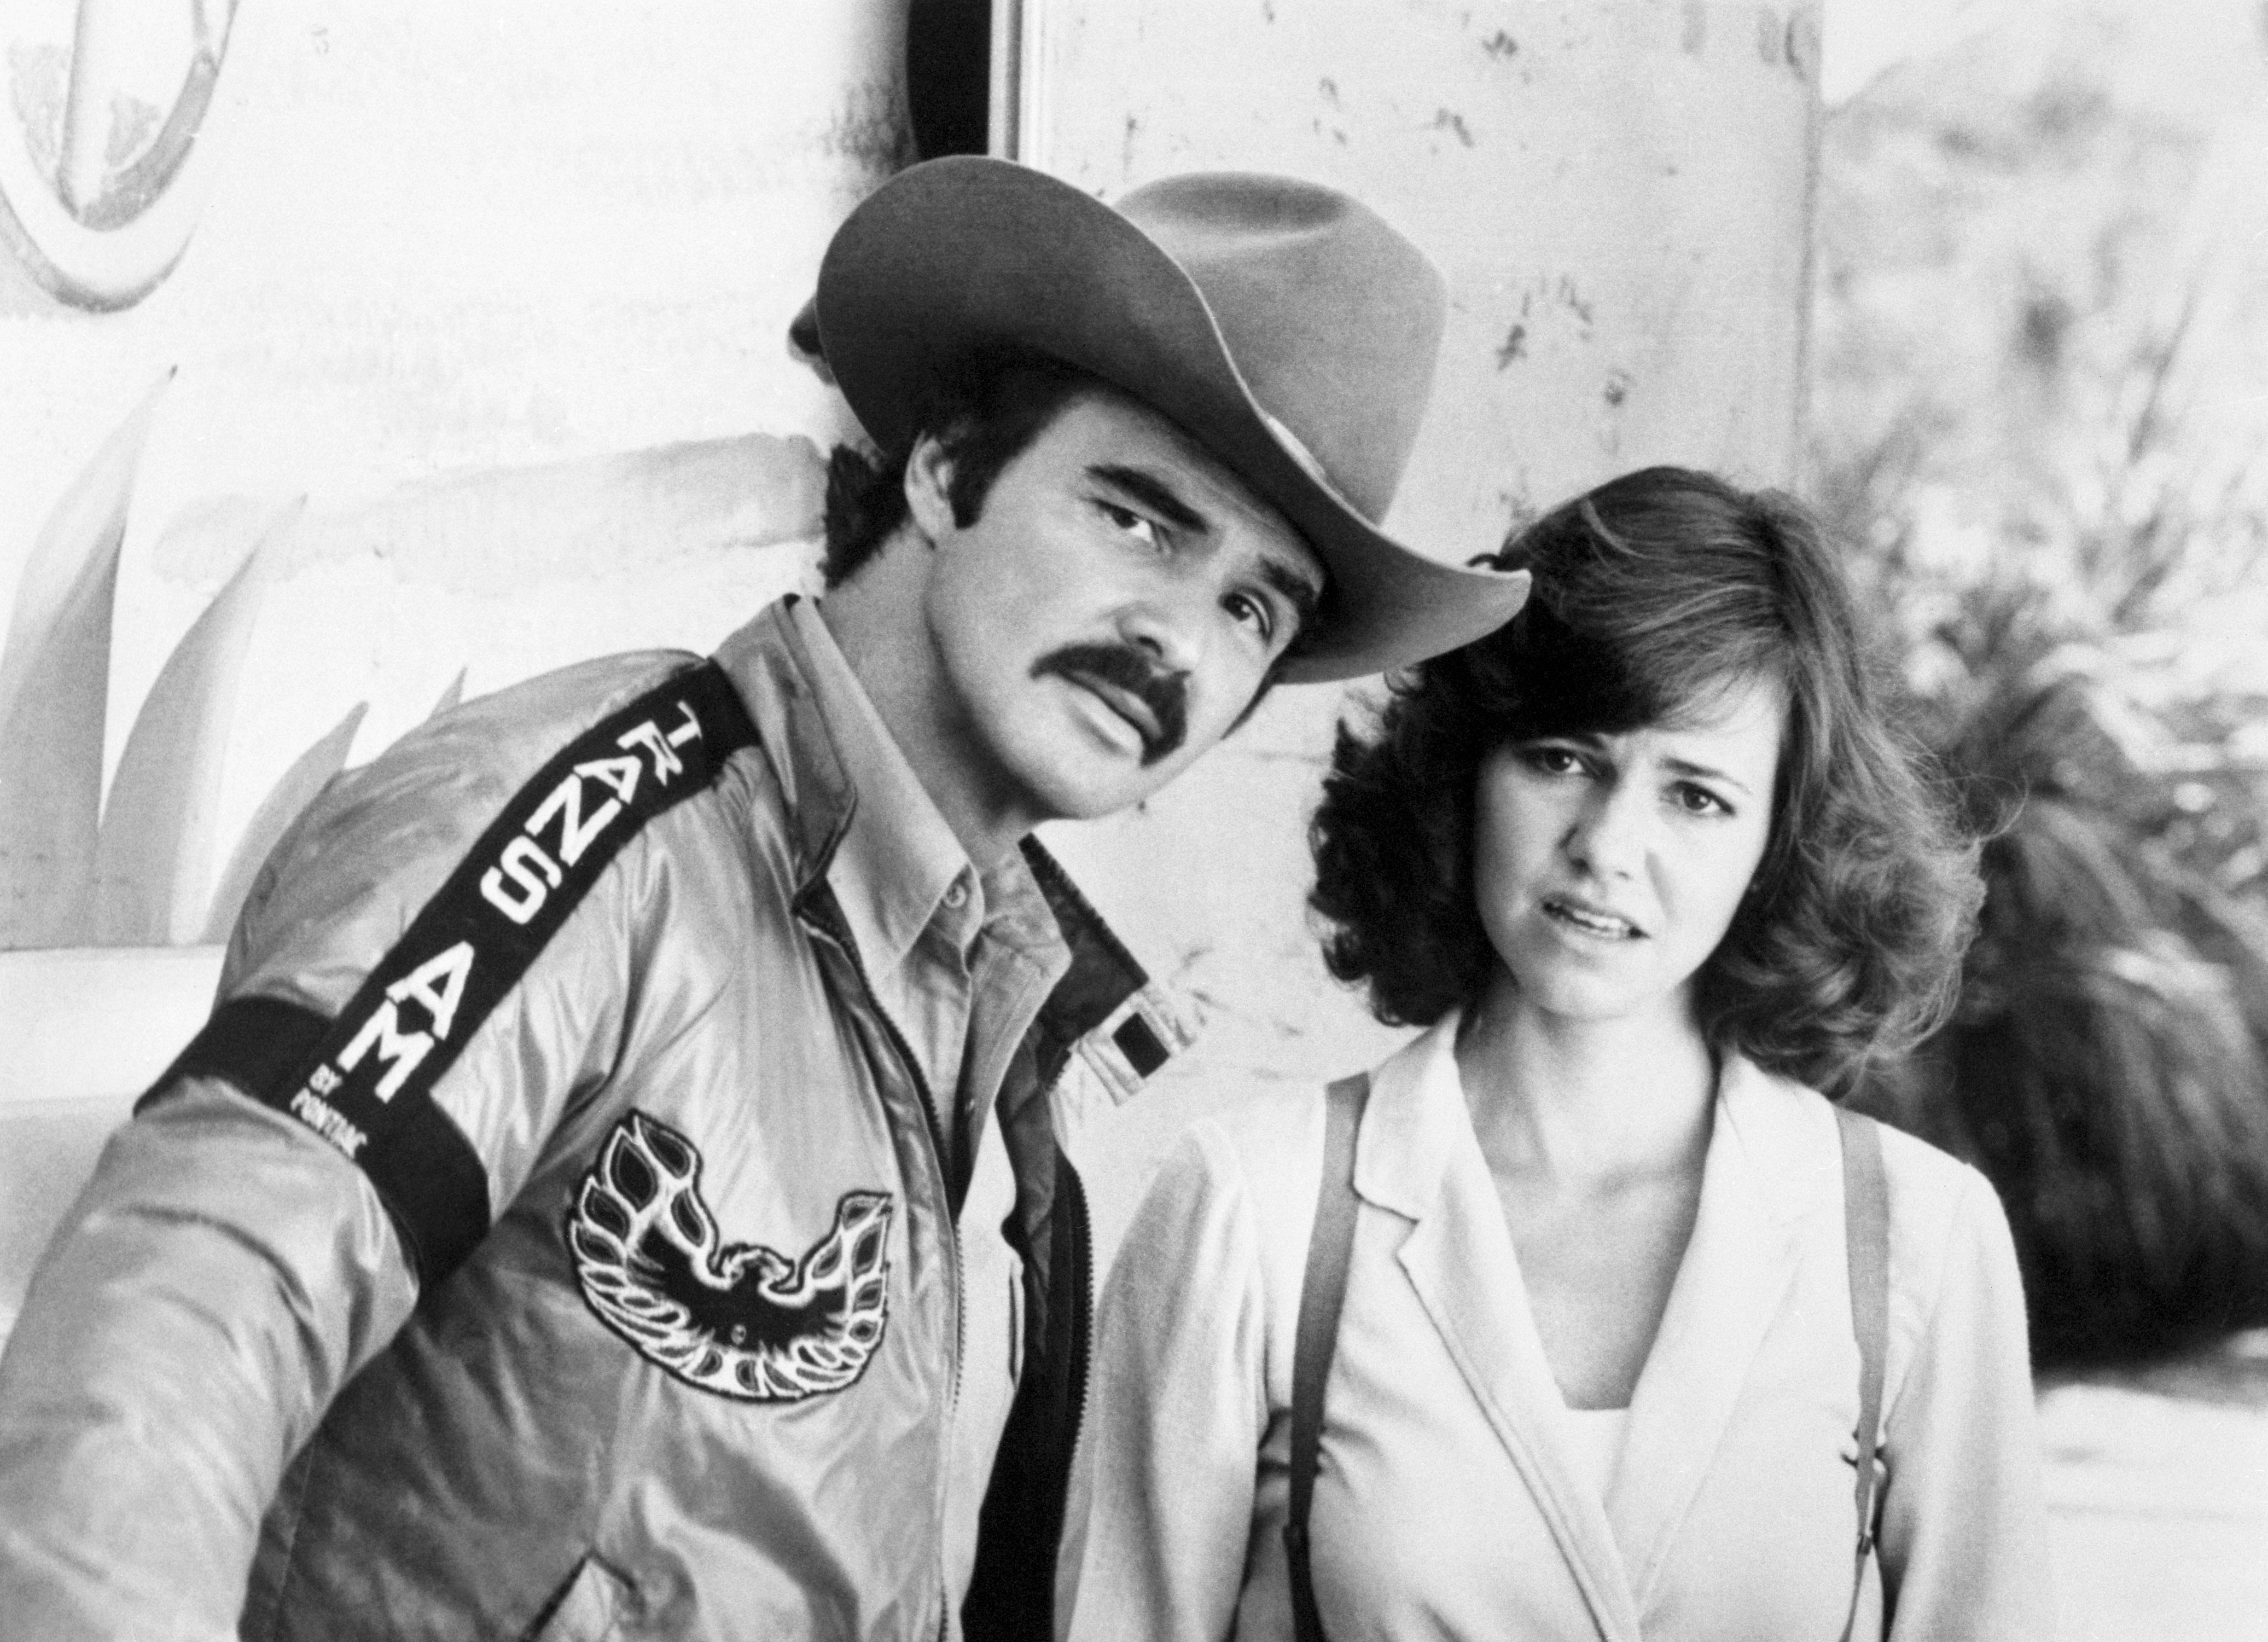 Burt Reynolds and Sally Field pictured in a scene from the movie "Smokey and the Bandit III," on August 8, 1980┃Source: Getty Images